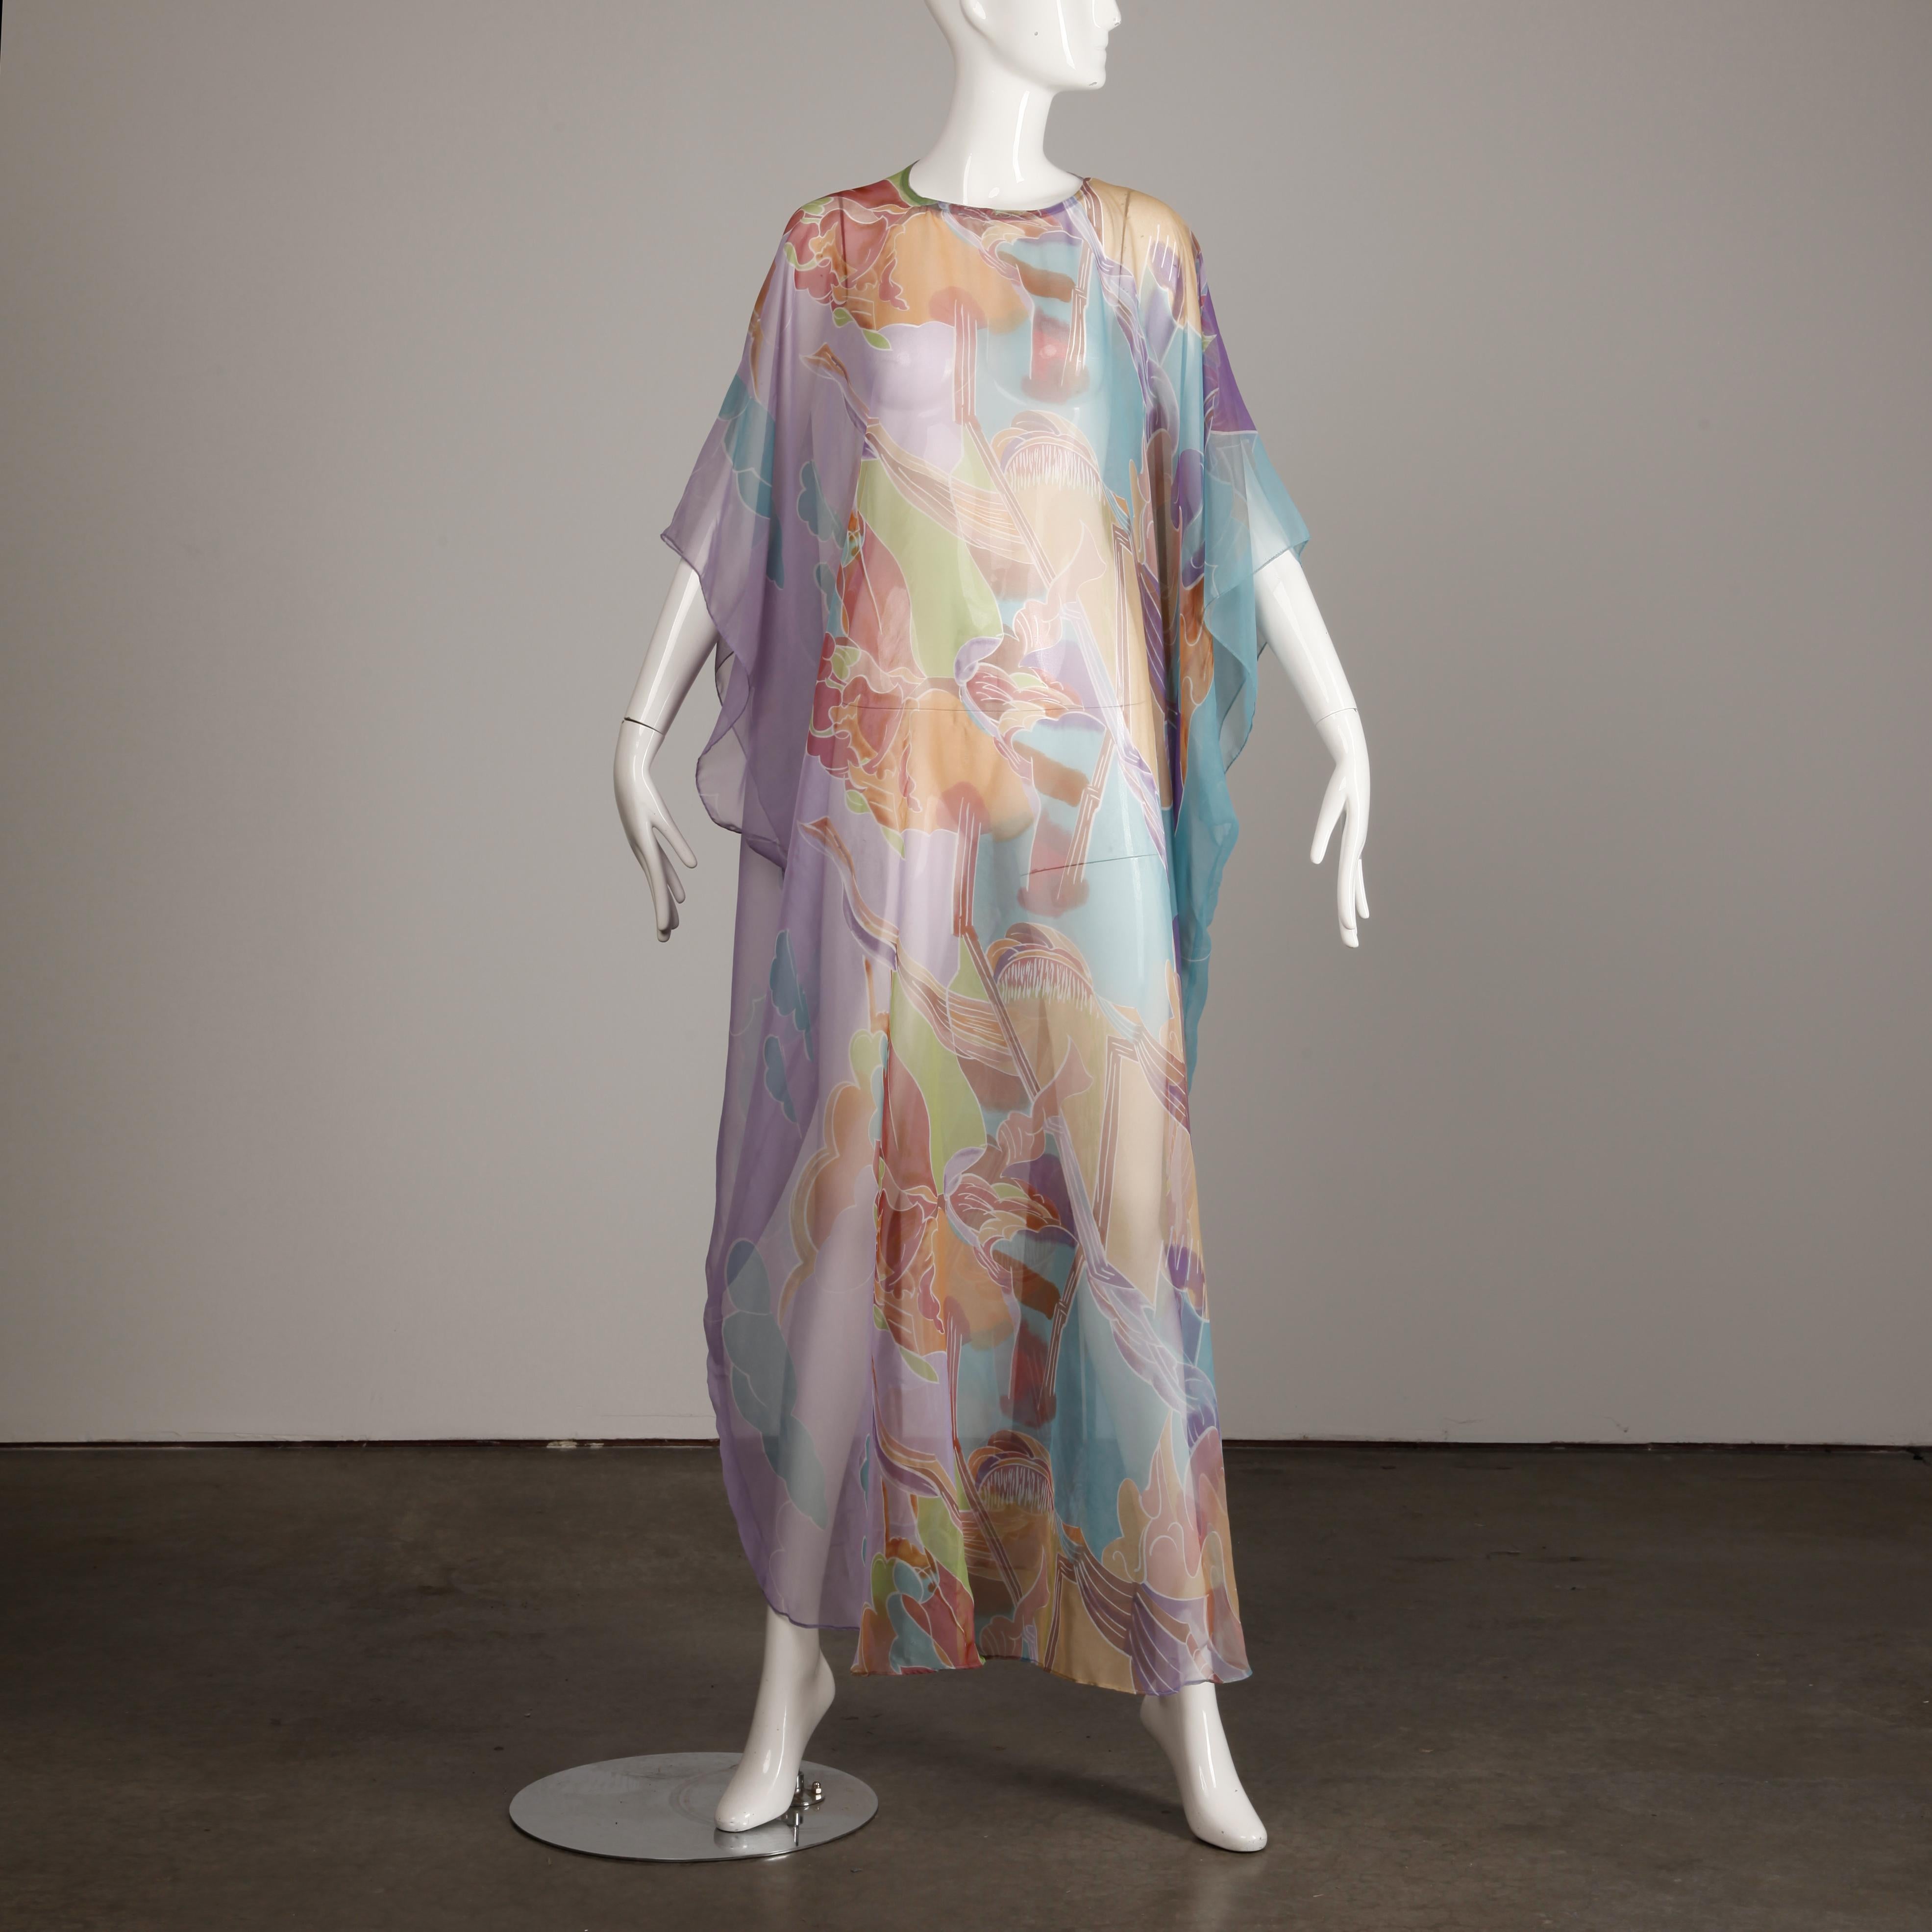 1970s Vintage Caftan Dress with a Sheer Abstract Cloud Print 2